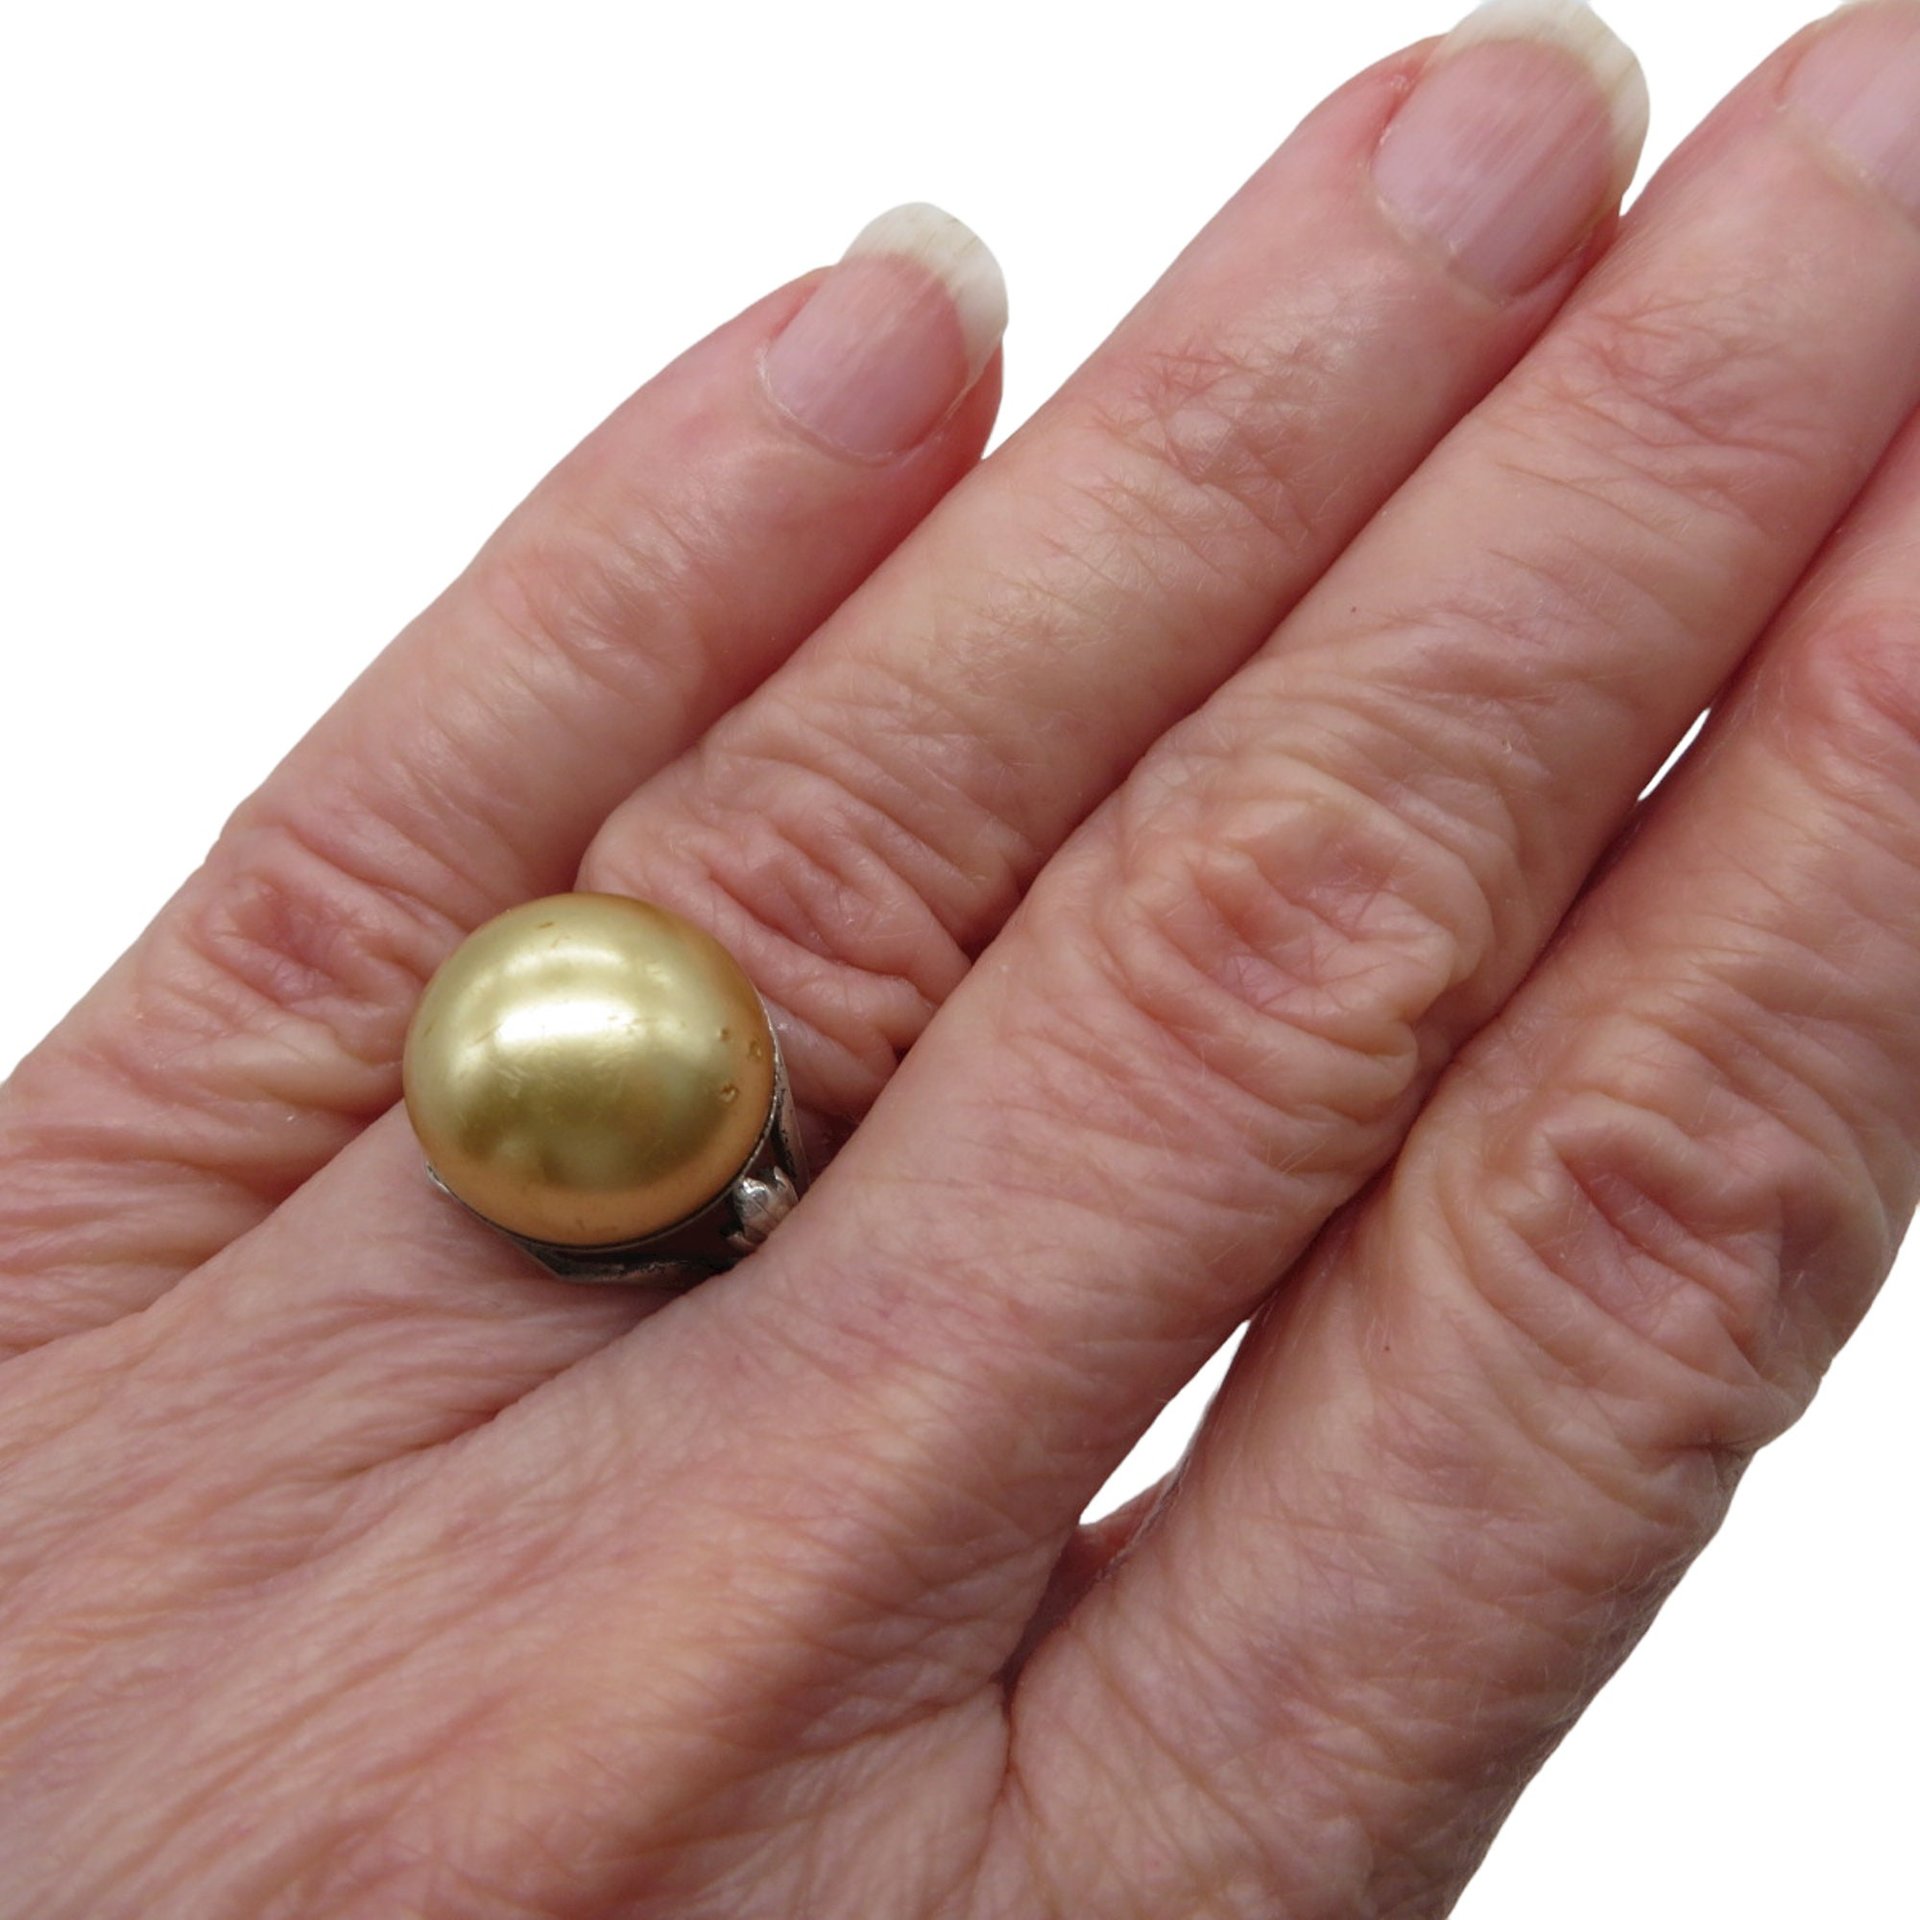 Vintage Sterling Silver Faux Pearl Ring, Size 5